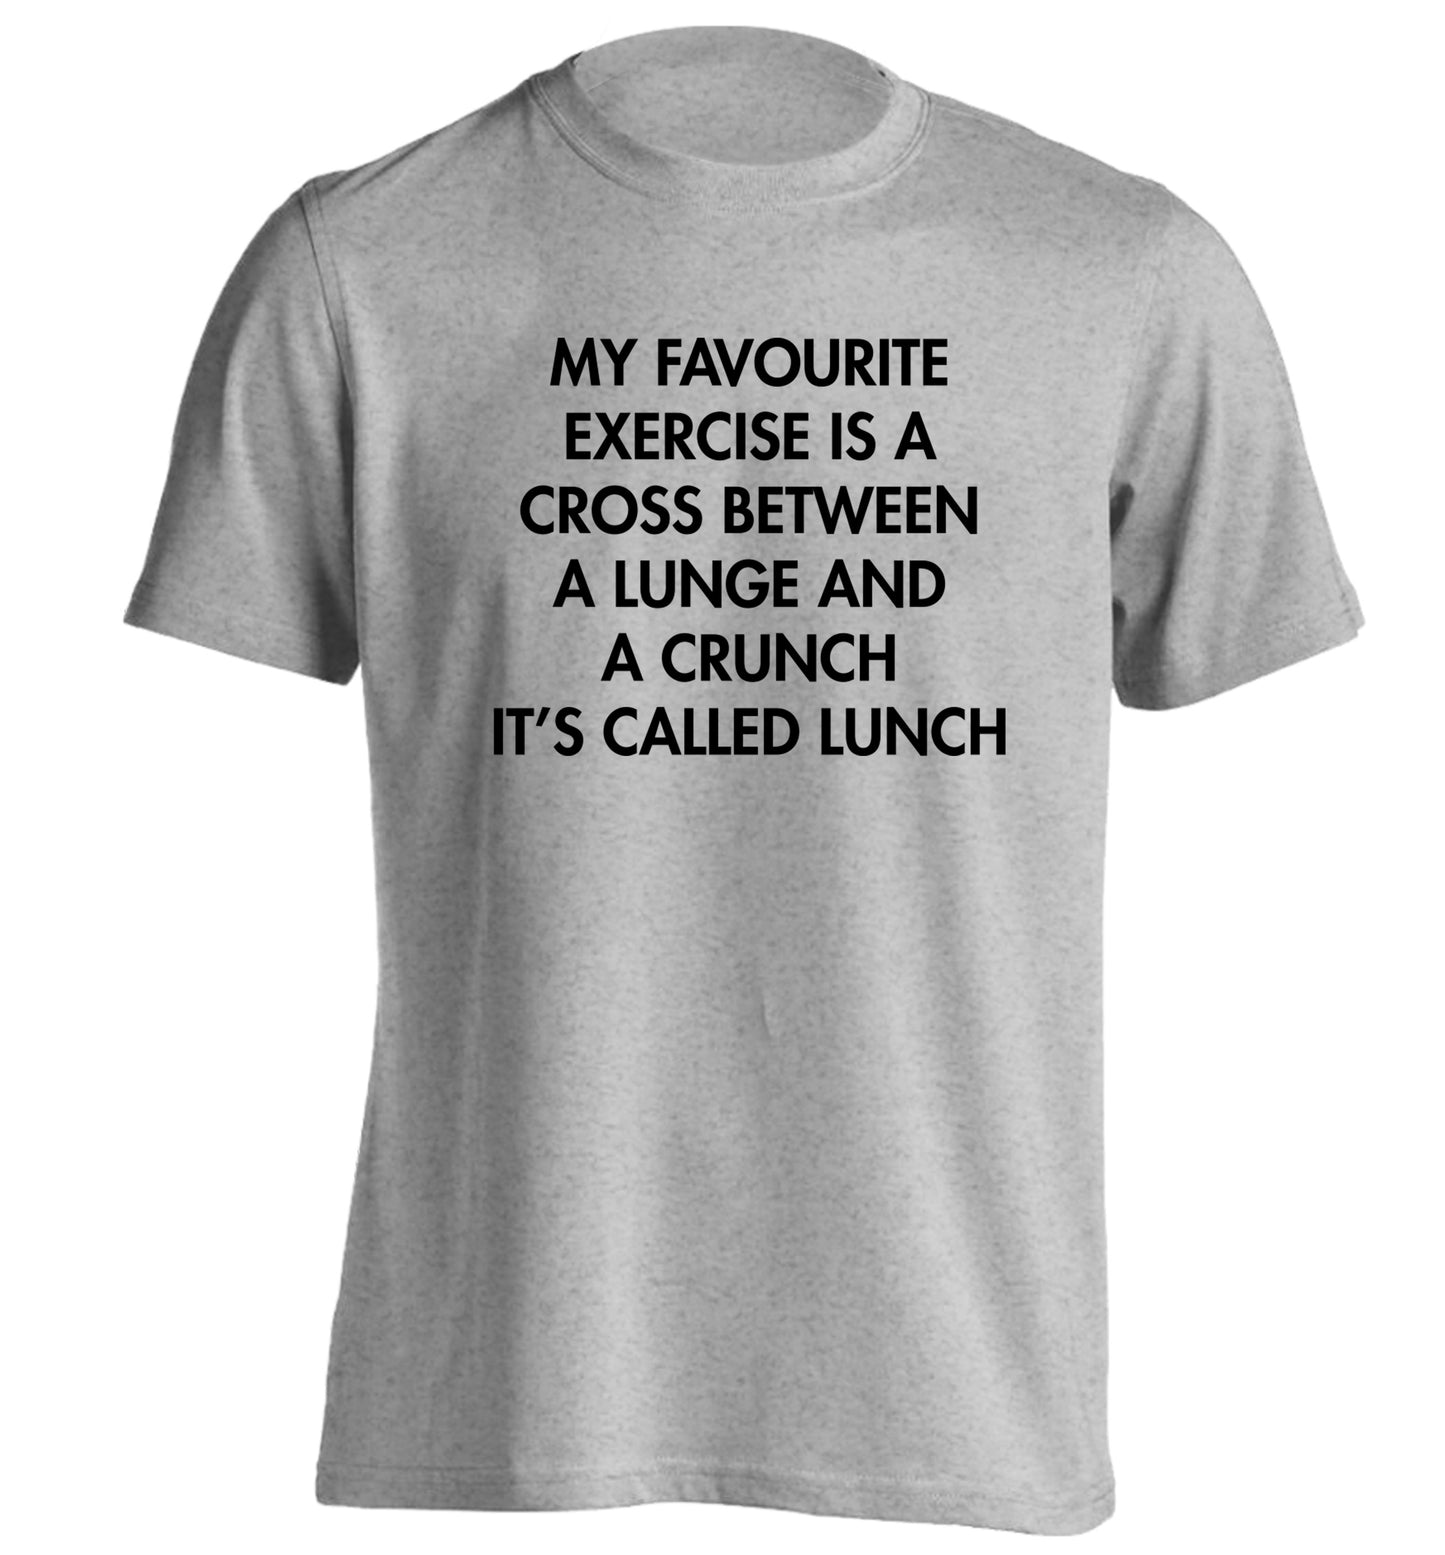 My favourite exercise is a cross between a lung and a crunch it's called lunch adults unisex grey Tshirt 2XL